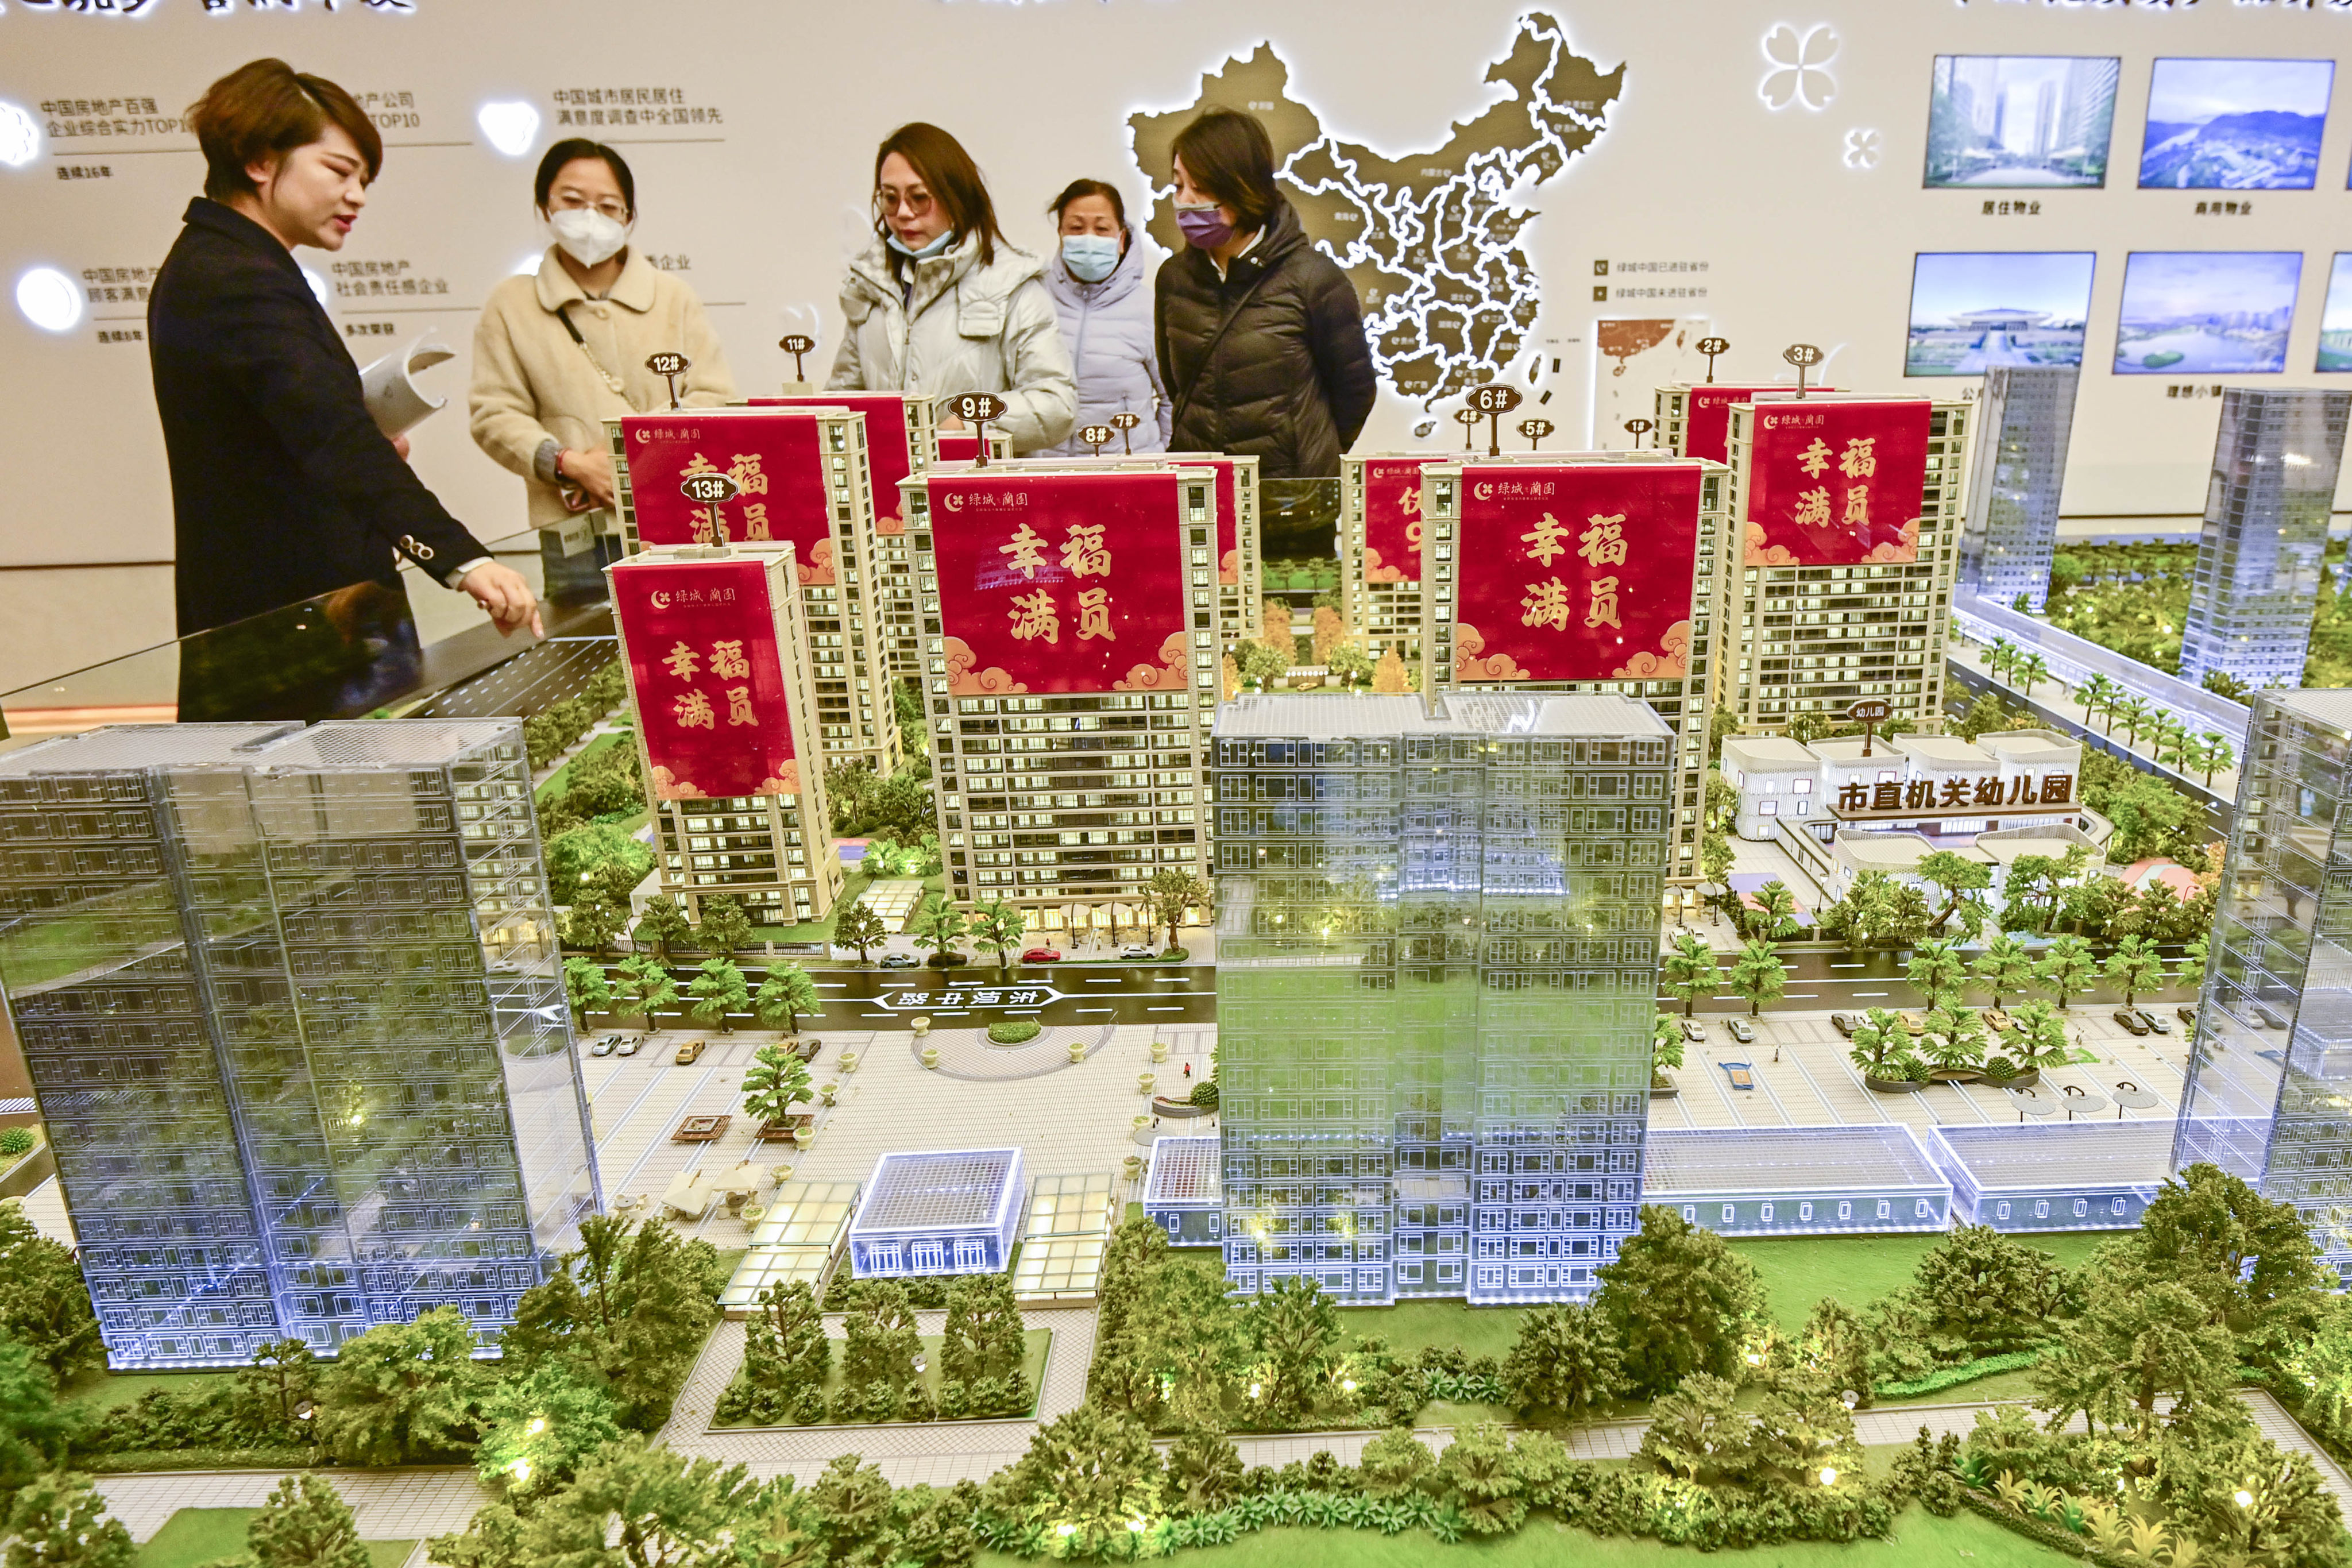 Improving sentiment in China’s real estate sector bodes well for stocks of property developers, according to a veteran analyst. Photo: CFOTO/Future Publishing via Getty Images